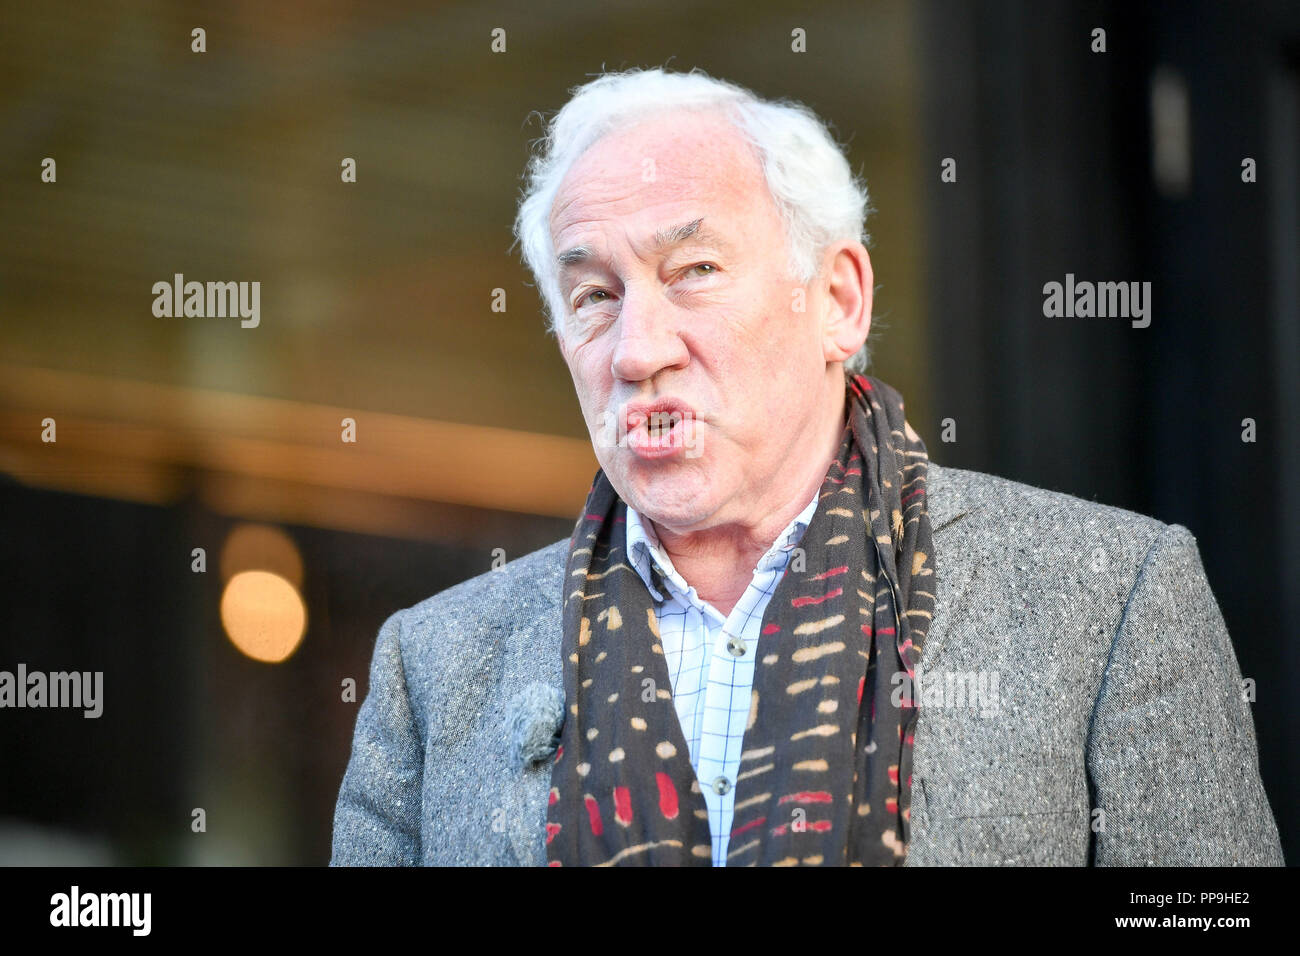 Actor Simon Callow speaking outside the Bristol Old Vic theatre before the oldest continuously working theatre in the English speaking world, built in 1766, reopens to the public after a &pound;26M renovation project. Stock Photo